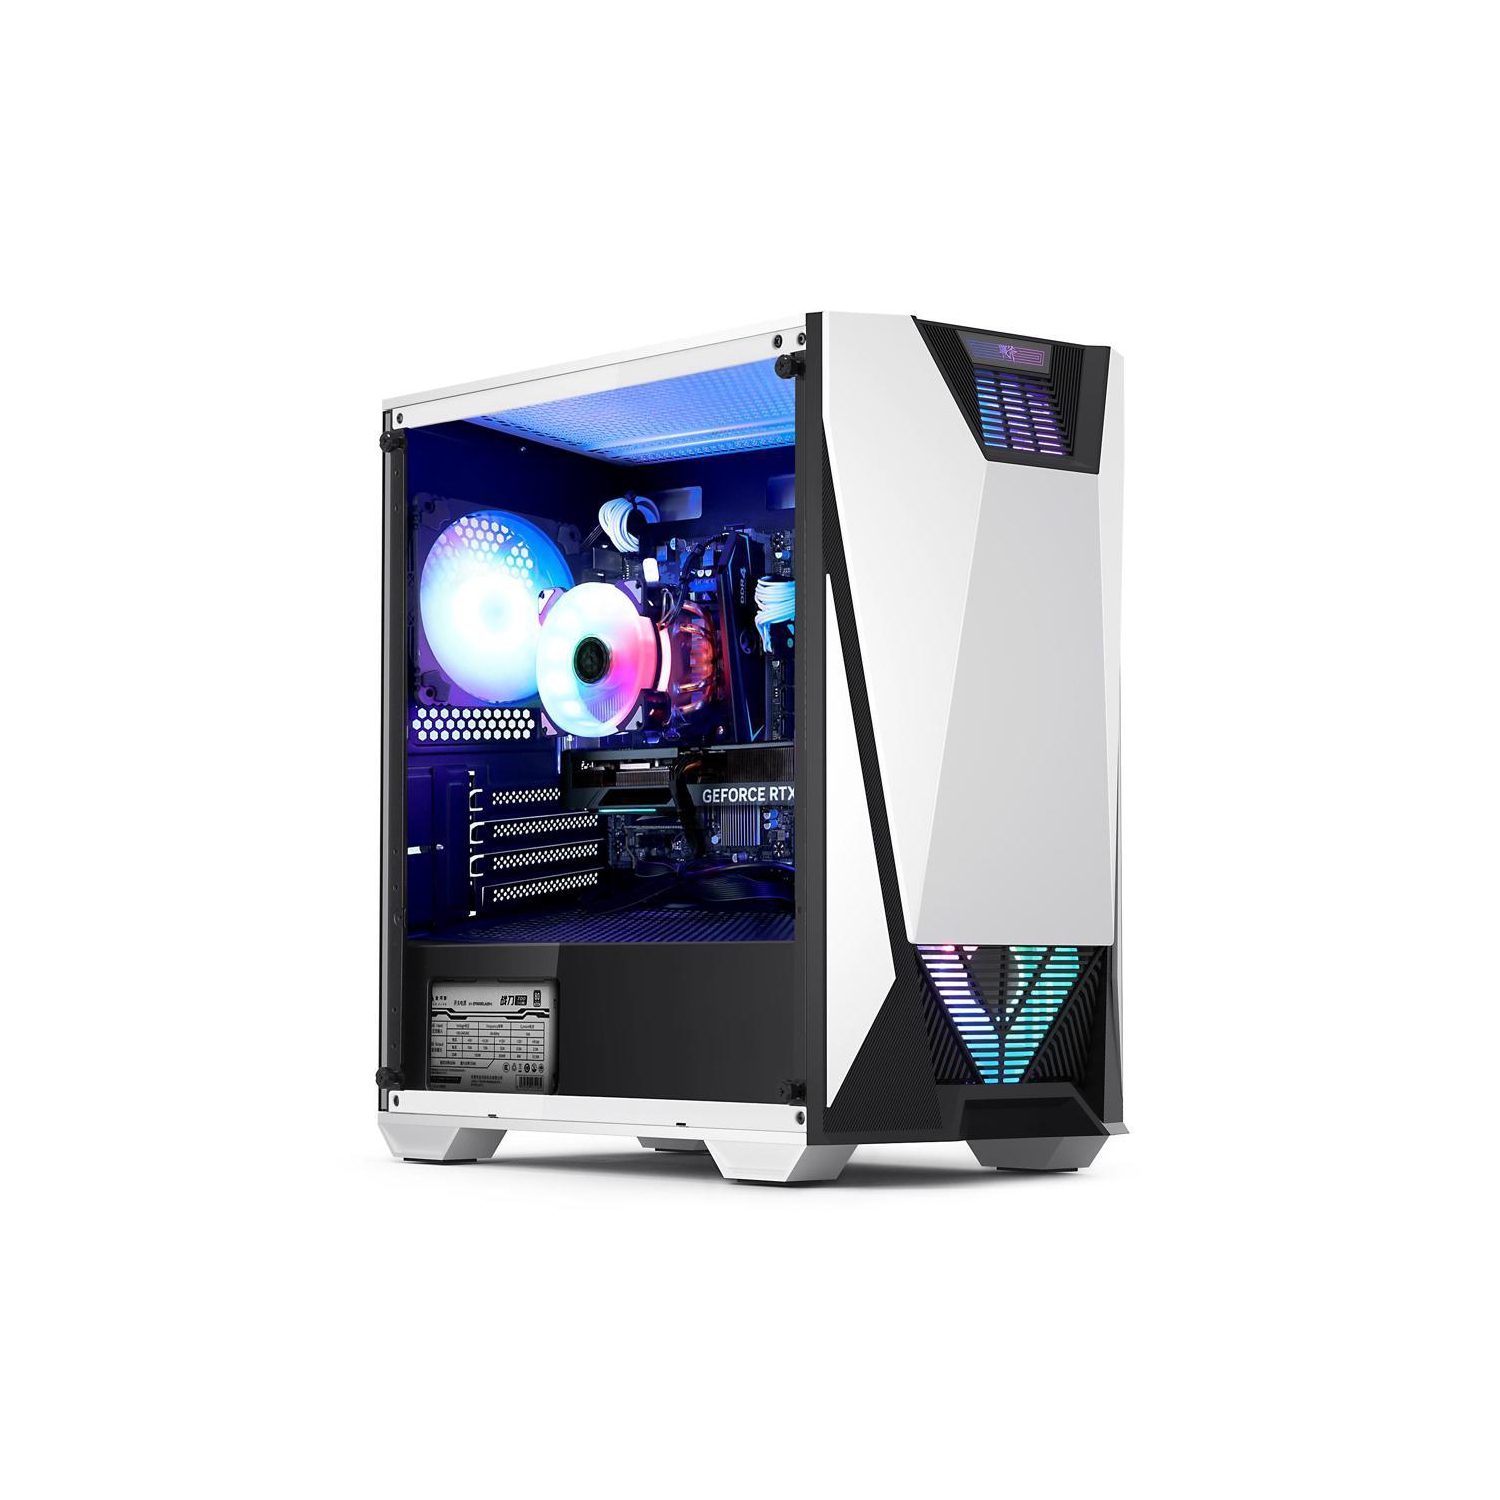 Hoengager Battleaxe Gaming - Intel Core i5-12400F 6-Core 2.5 GHz-NVIDIA GeForce RTX 3060 Ti- 16GB DDR4 3200MHz - 500GB M.2 NVMe SSD- WIFI -RGB Fans - Windows 11 Pro Computer